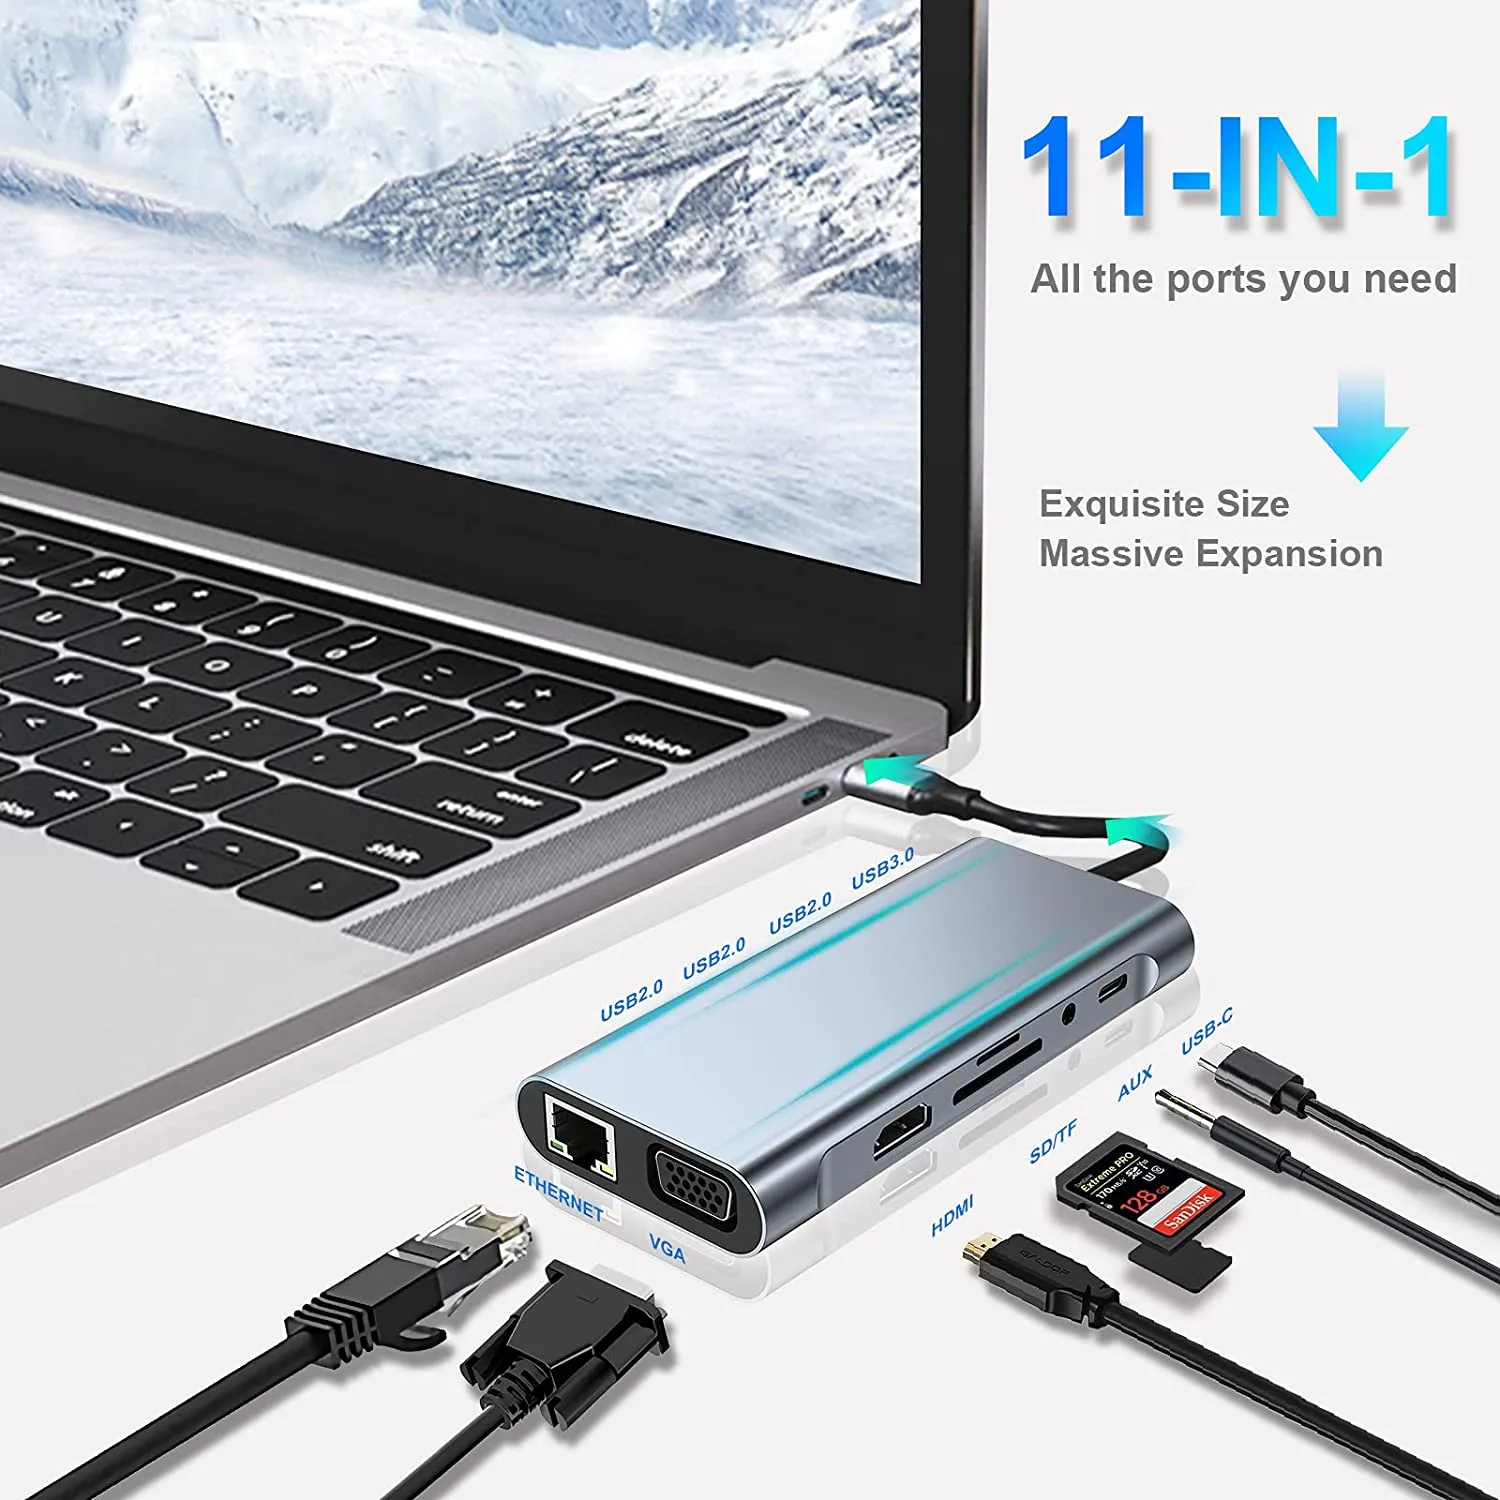 11 In 1 USB HUB Docking Station Adapter with 4K HDMI, VGA, Type C PD, Ethernet RJ45 Port, SD/TF Cards, 3.5 mm AUX, Compatible MacBook Pro/Air